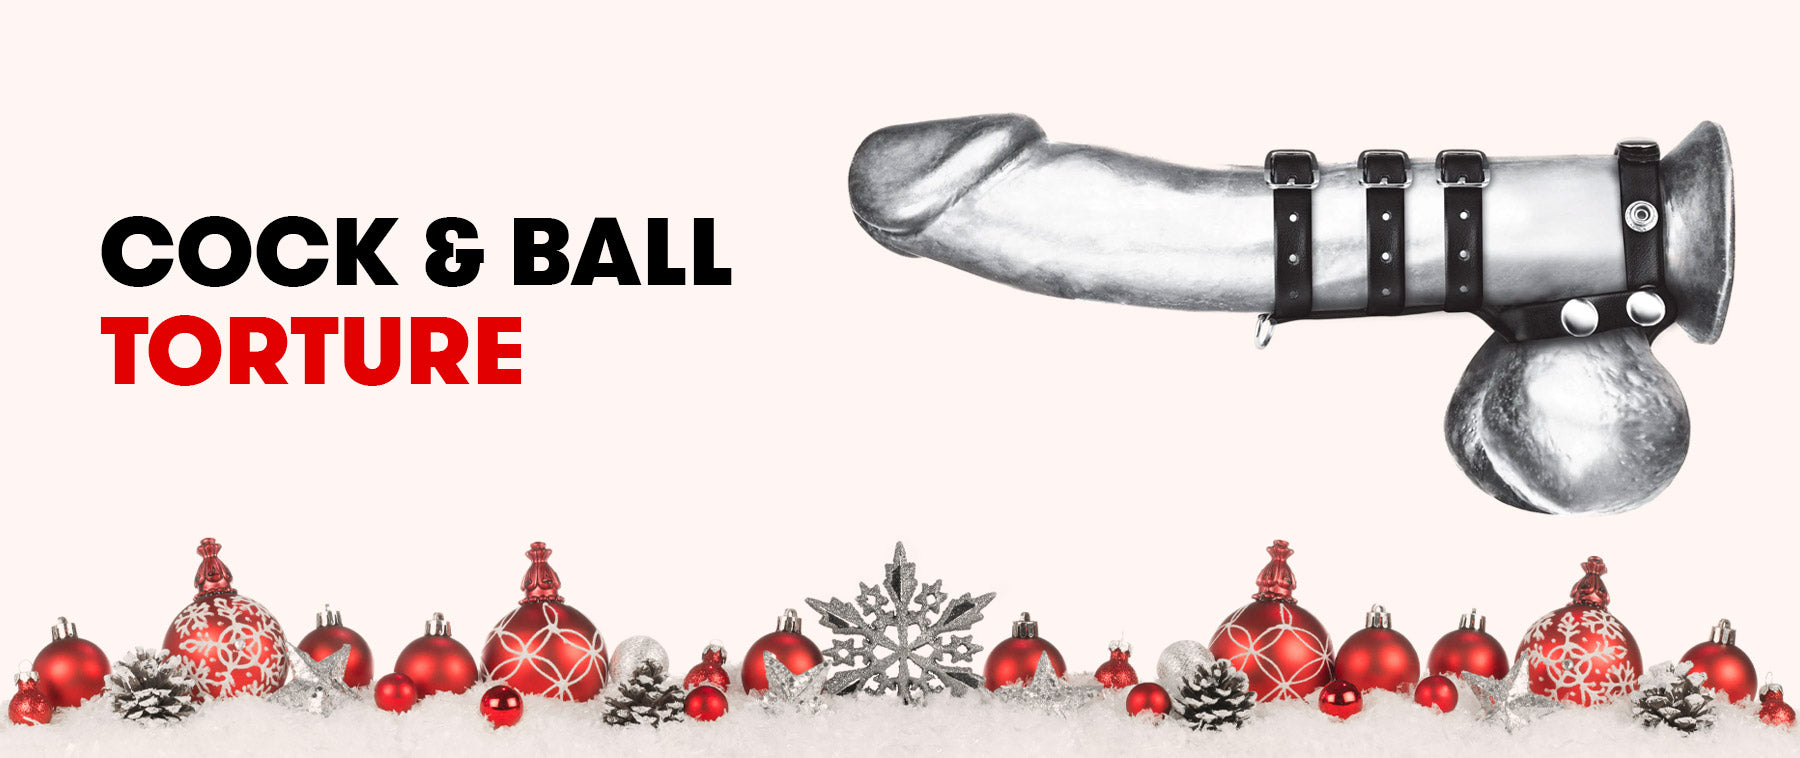 Cock & Ball Torture - 14 Kinky Christmas Gifts: Sex Toys, Bondage, Vibrators, Dildos - Blog by Lux Fetish 